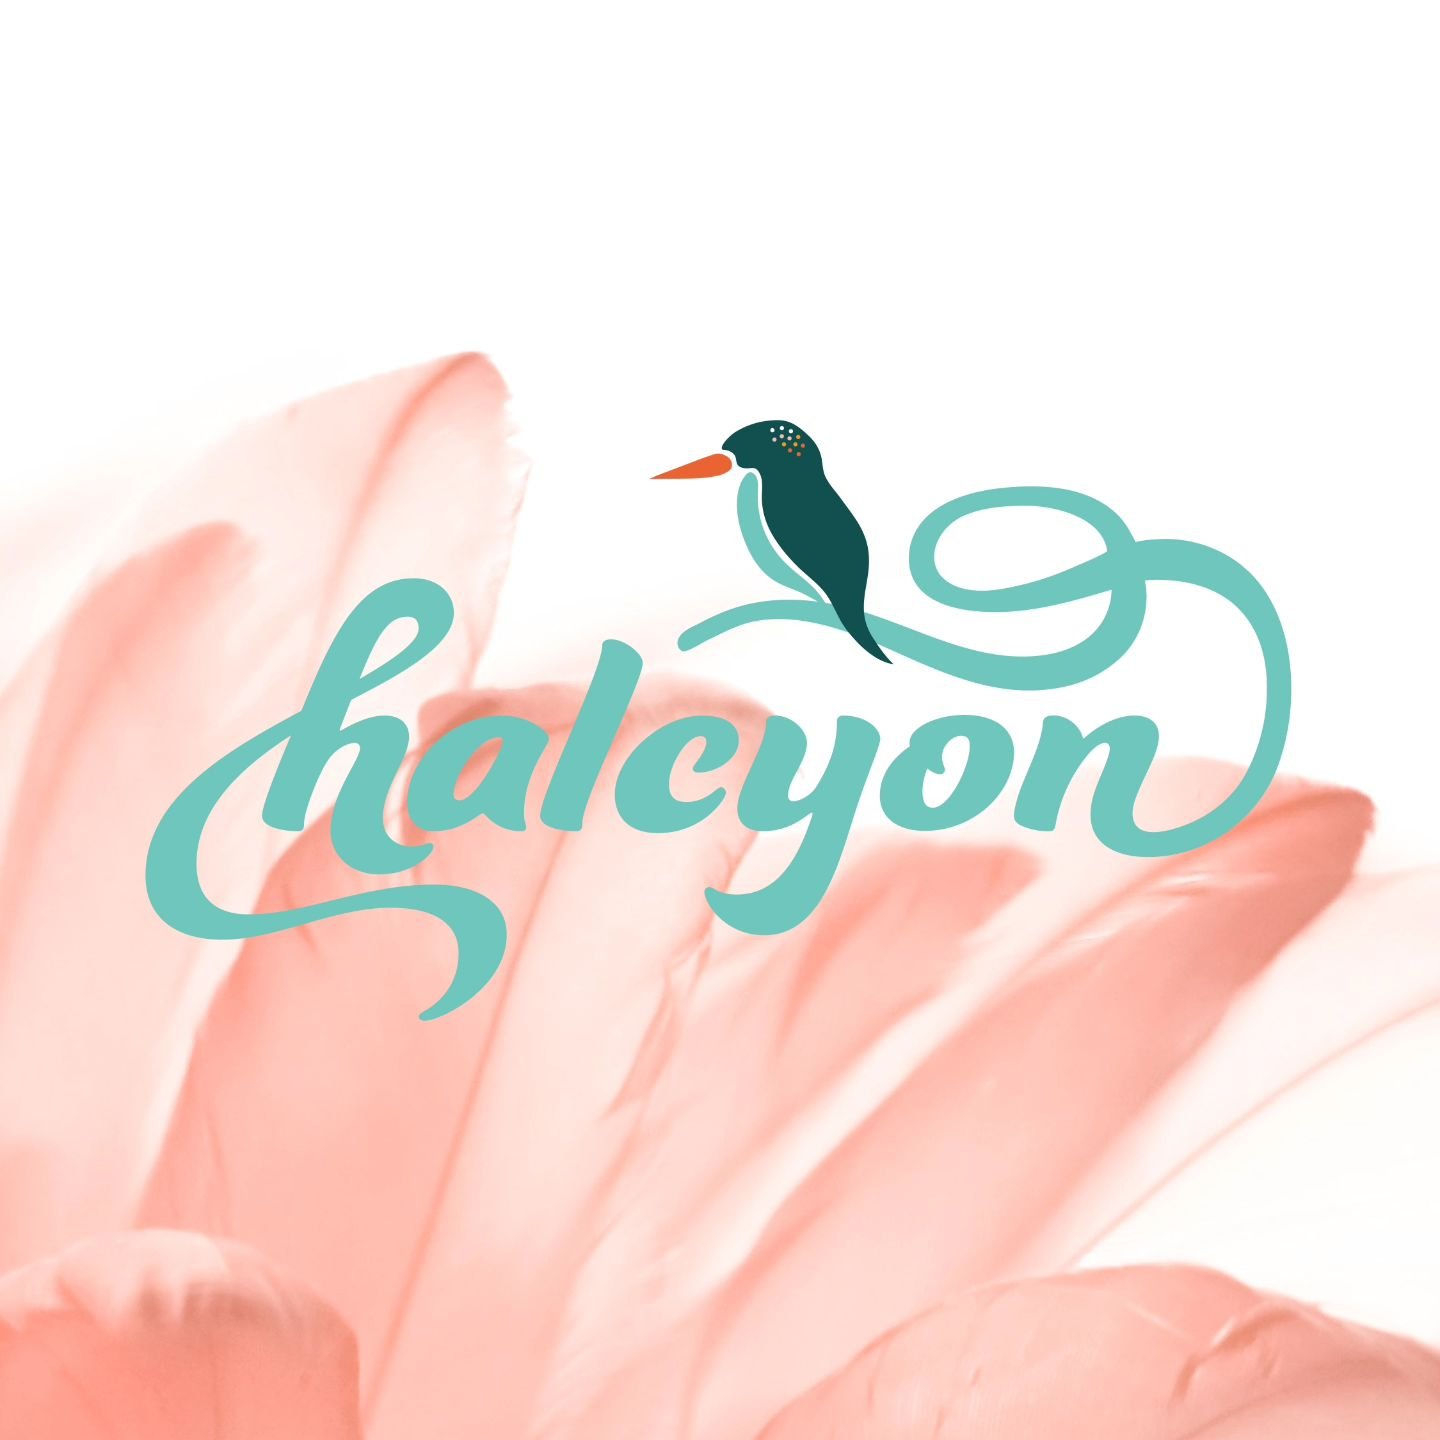 Can I say that every project is my favorite project? Because this one will always be a favorite! 

The branding for @halcyon.therapy was like a colorful, confetti-filled party, celebrating an amazing therapist who helps women and LGBTQIA+ folks rel